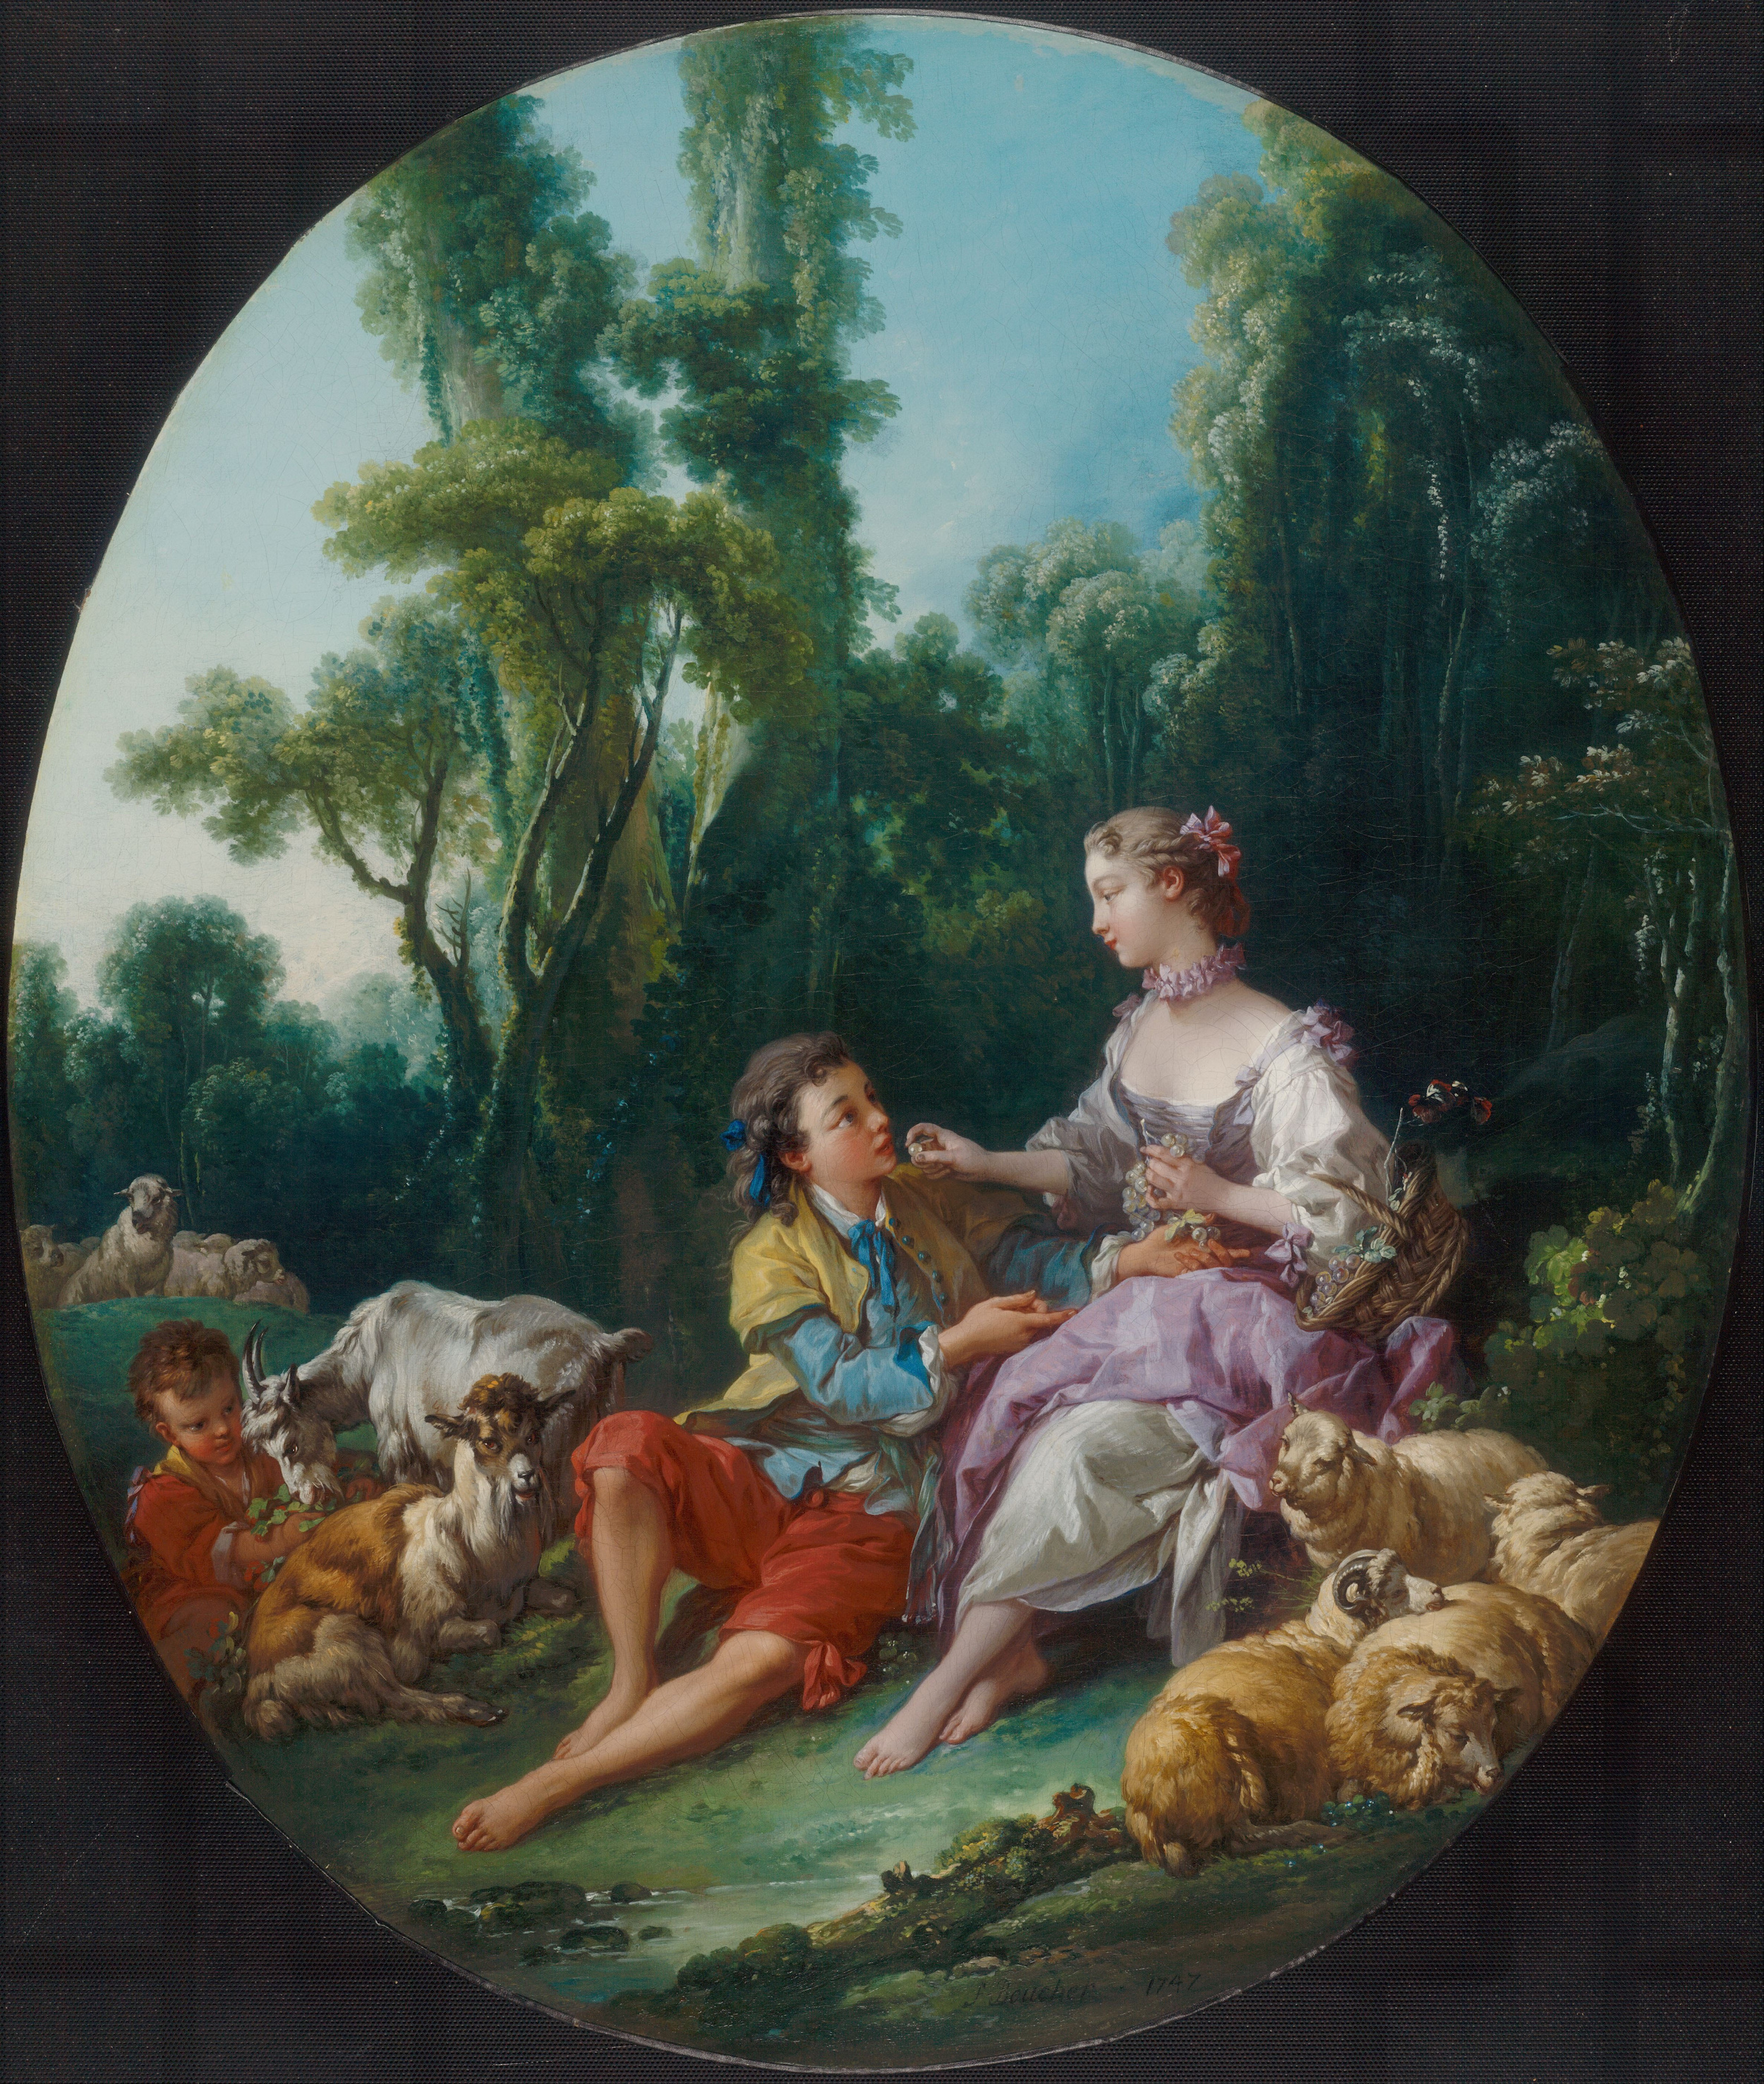 Are They Thinking about the Grape? by Francois Boucher - 1747 - 80.8 x 68.5 cm Art Institute of Chicago